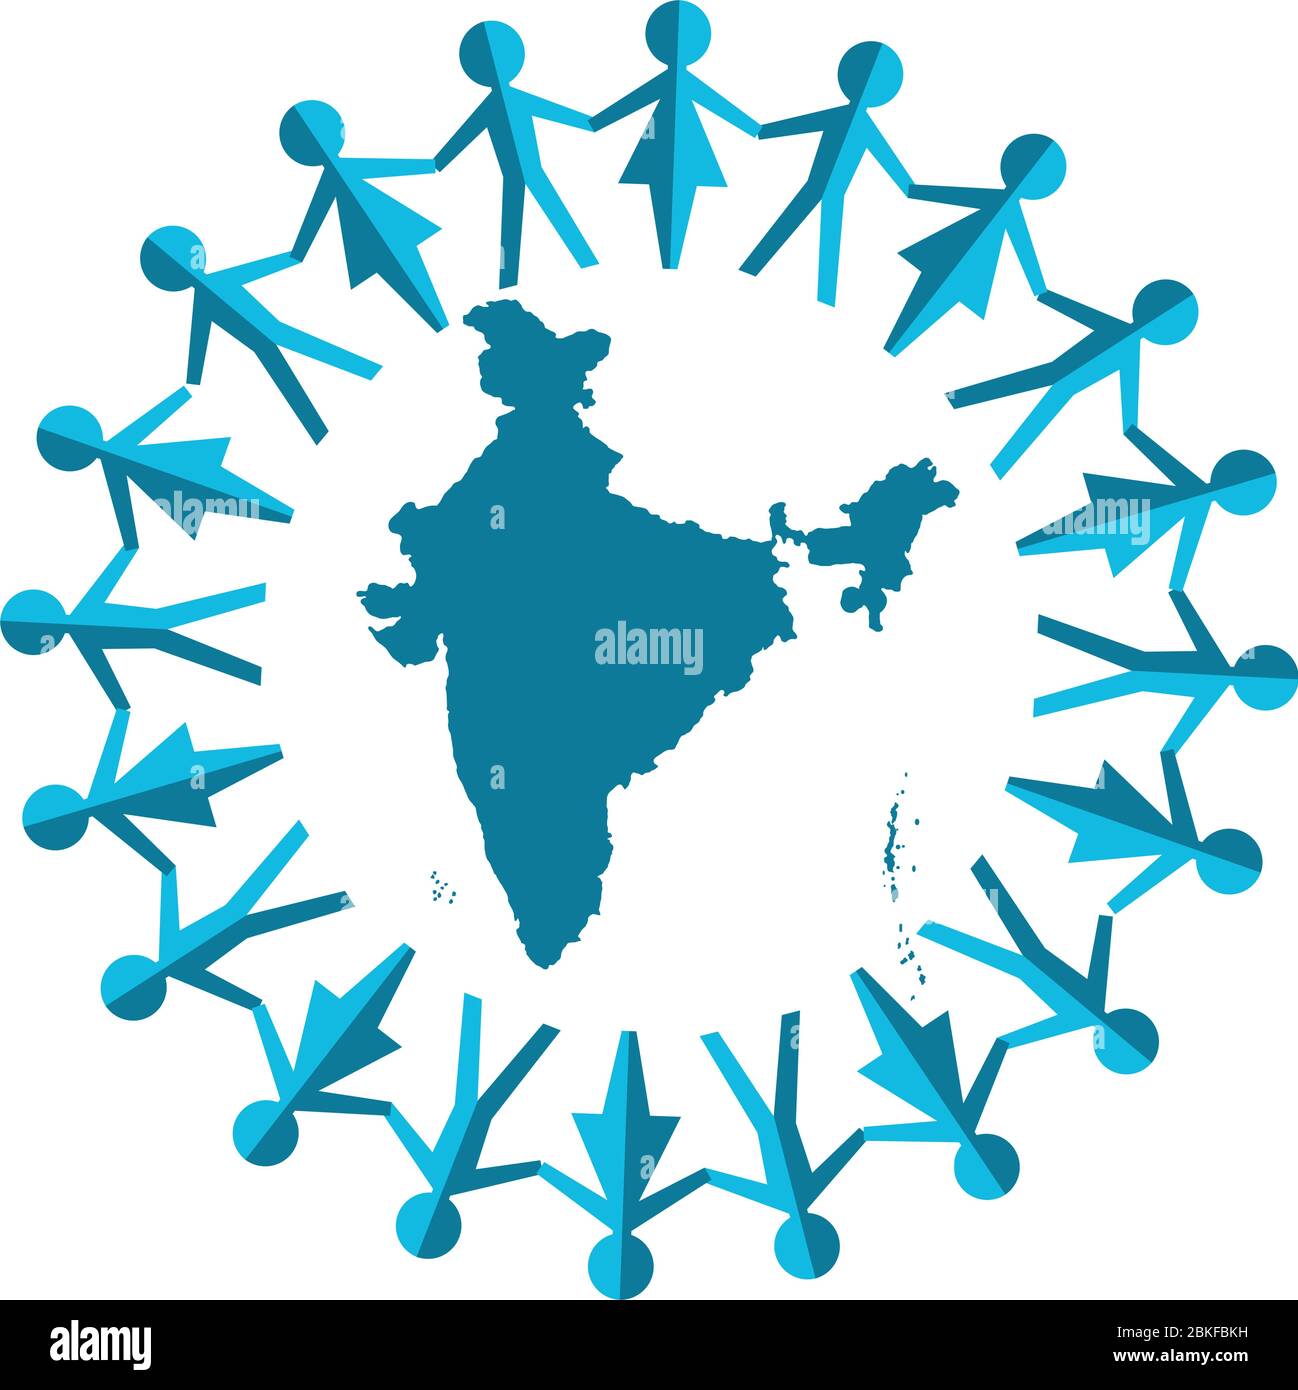 Illustration art of a abstract people around india map with isolated background Stock Vector